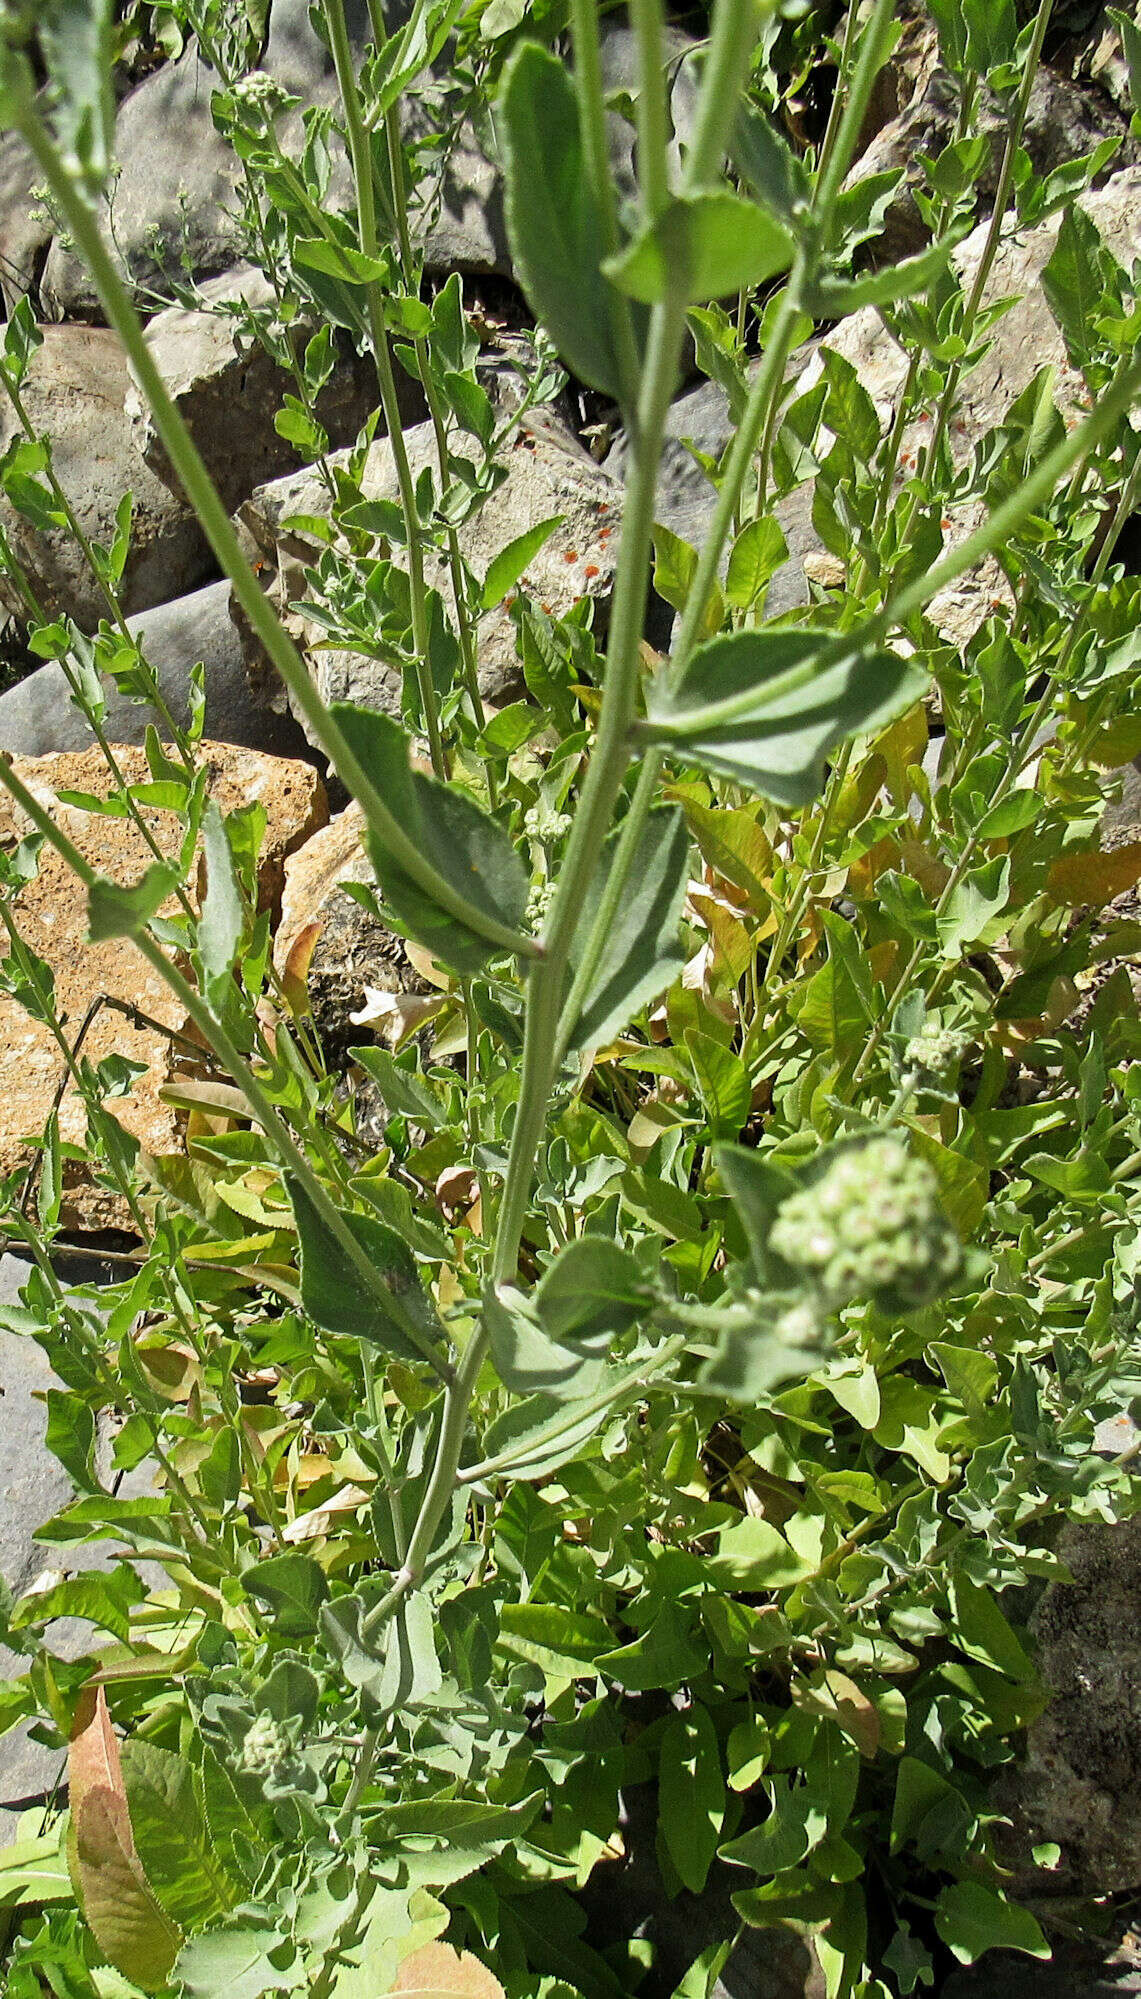 Image of Alecost or Balsam Herb